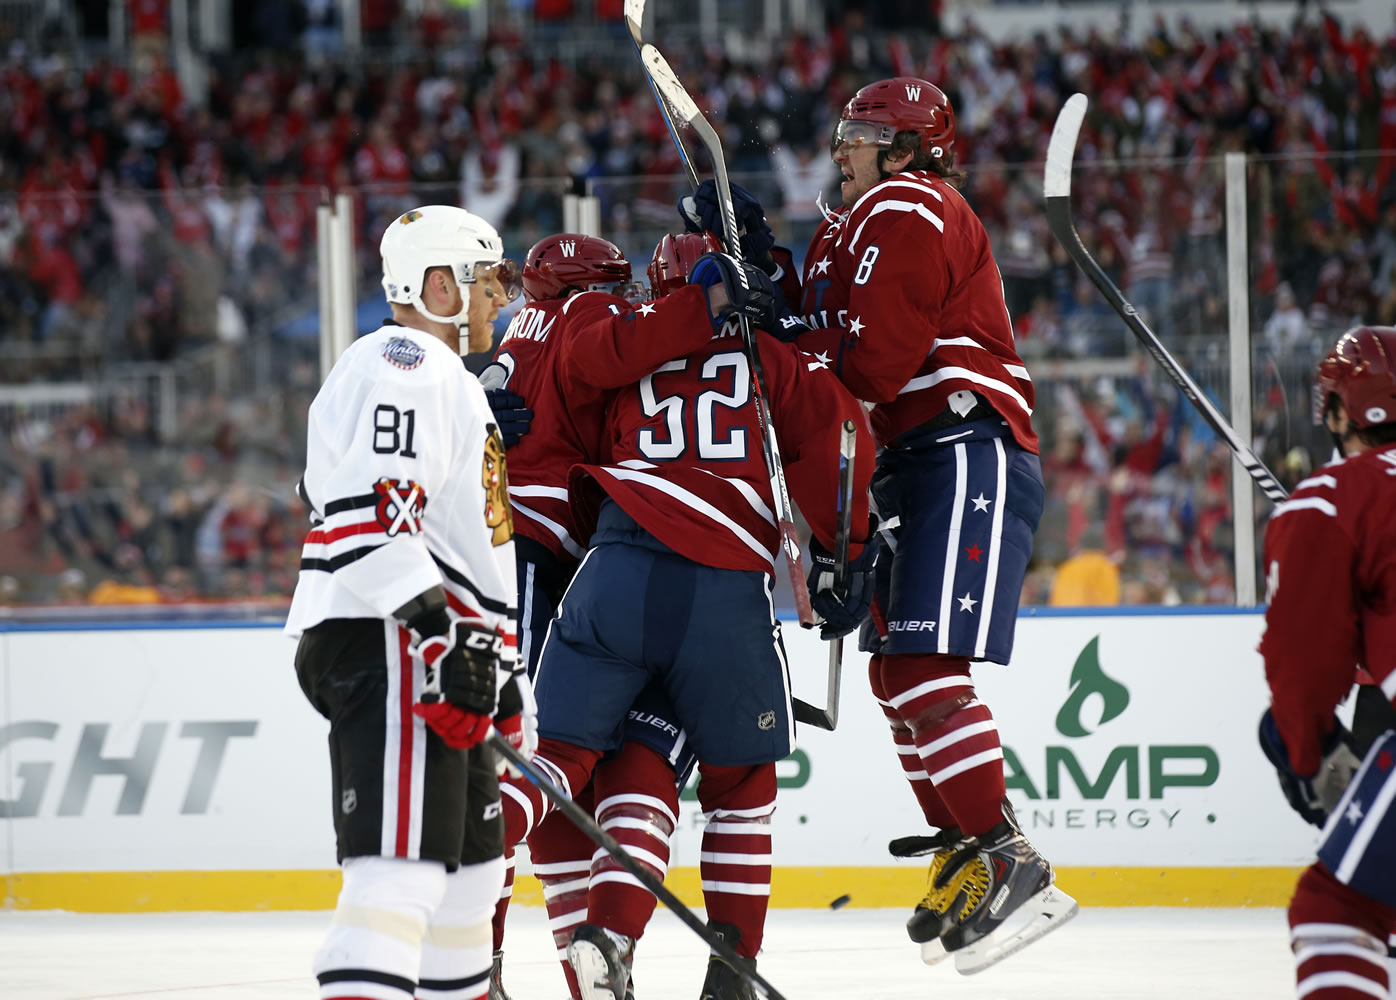 Washington's Nicklas Backstrom, Mike Green (52) and Alex Ovechkin (8) surround Troy Brouwer after Brouwer scored the winning goal as Chicago Blackhawks right wing Marian Hossa (81) looks on in the closing seconds of the third period of the Winter Classic at Nationals Park on Thursday, Jan. 1, 2015, in Washington. The Capitals won 3-2.